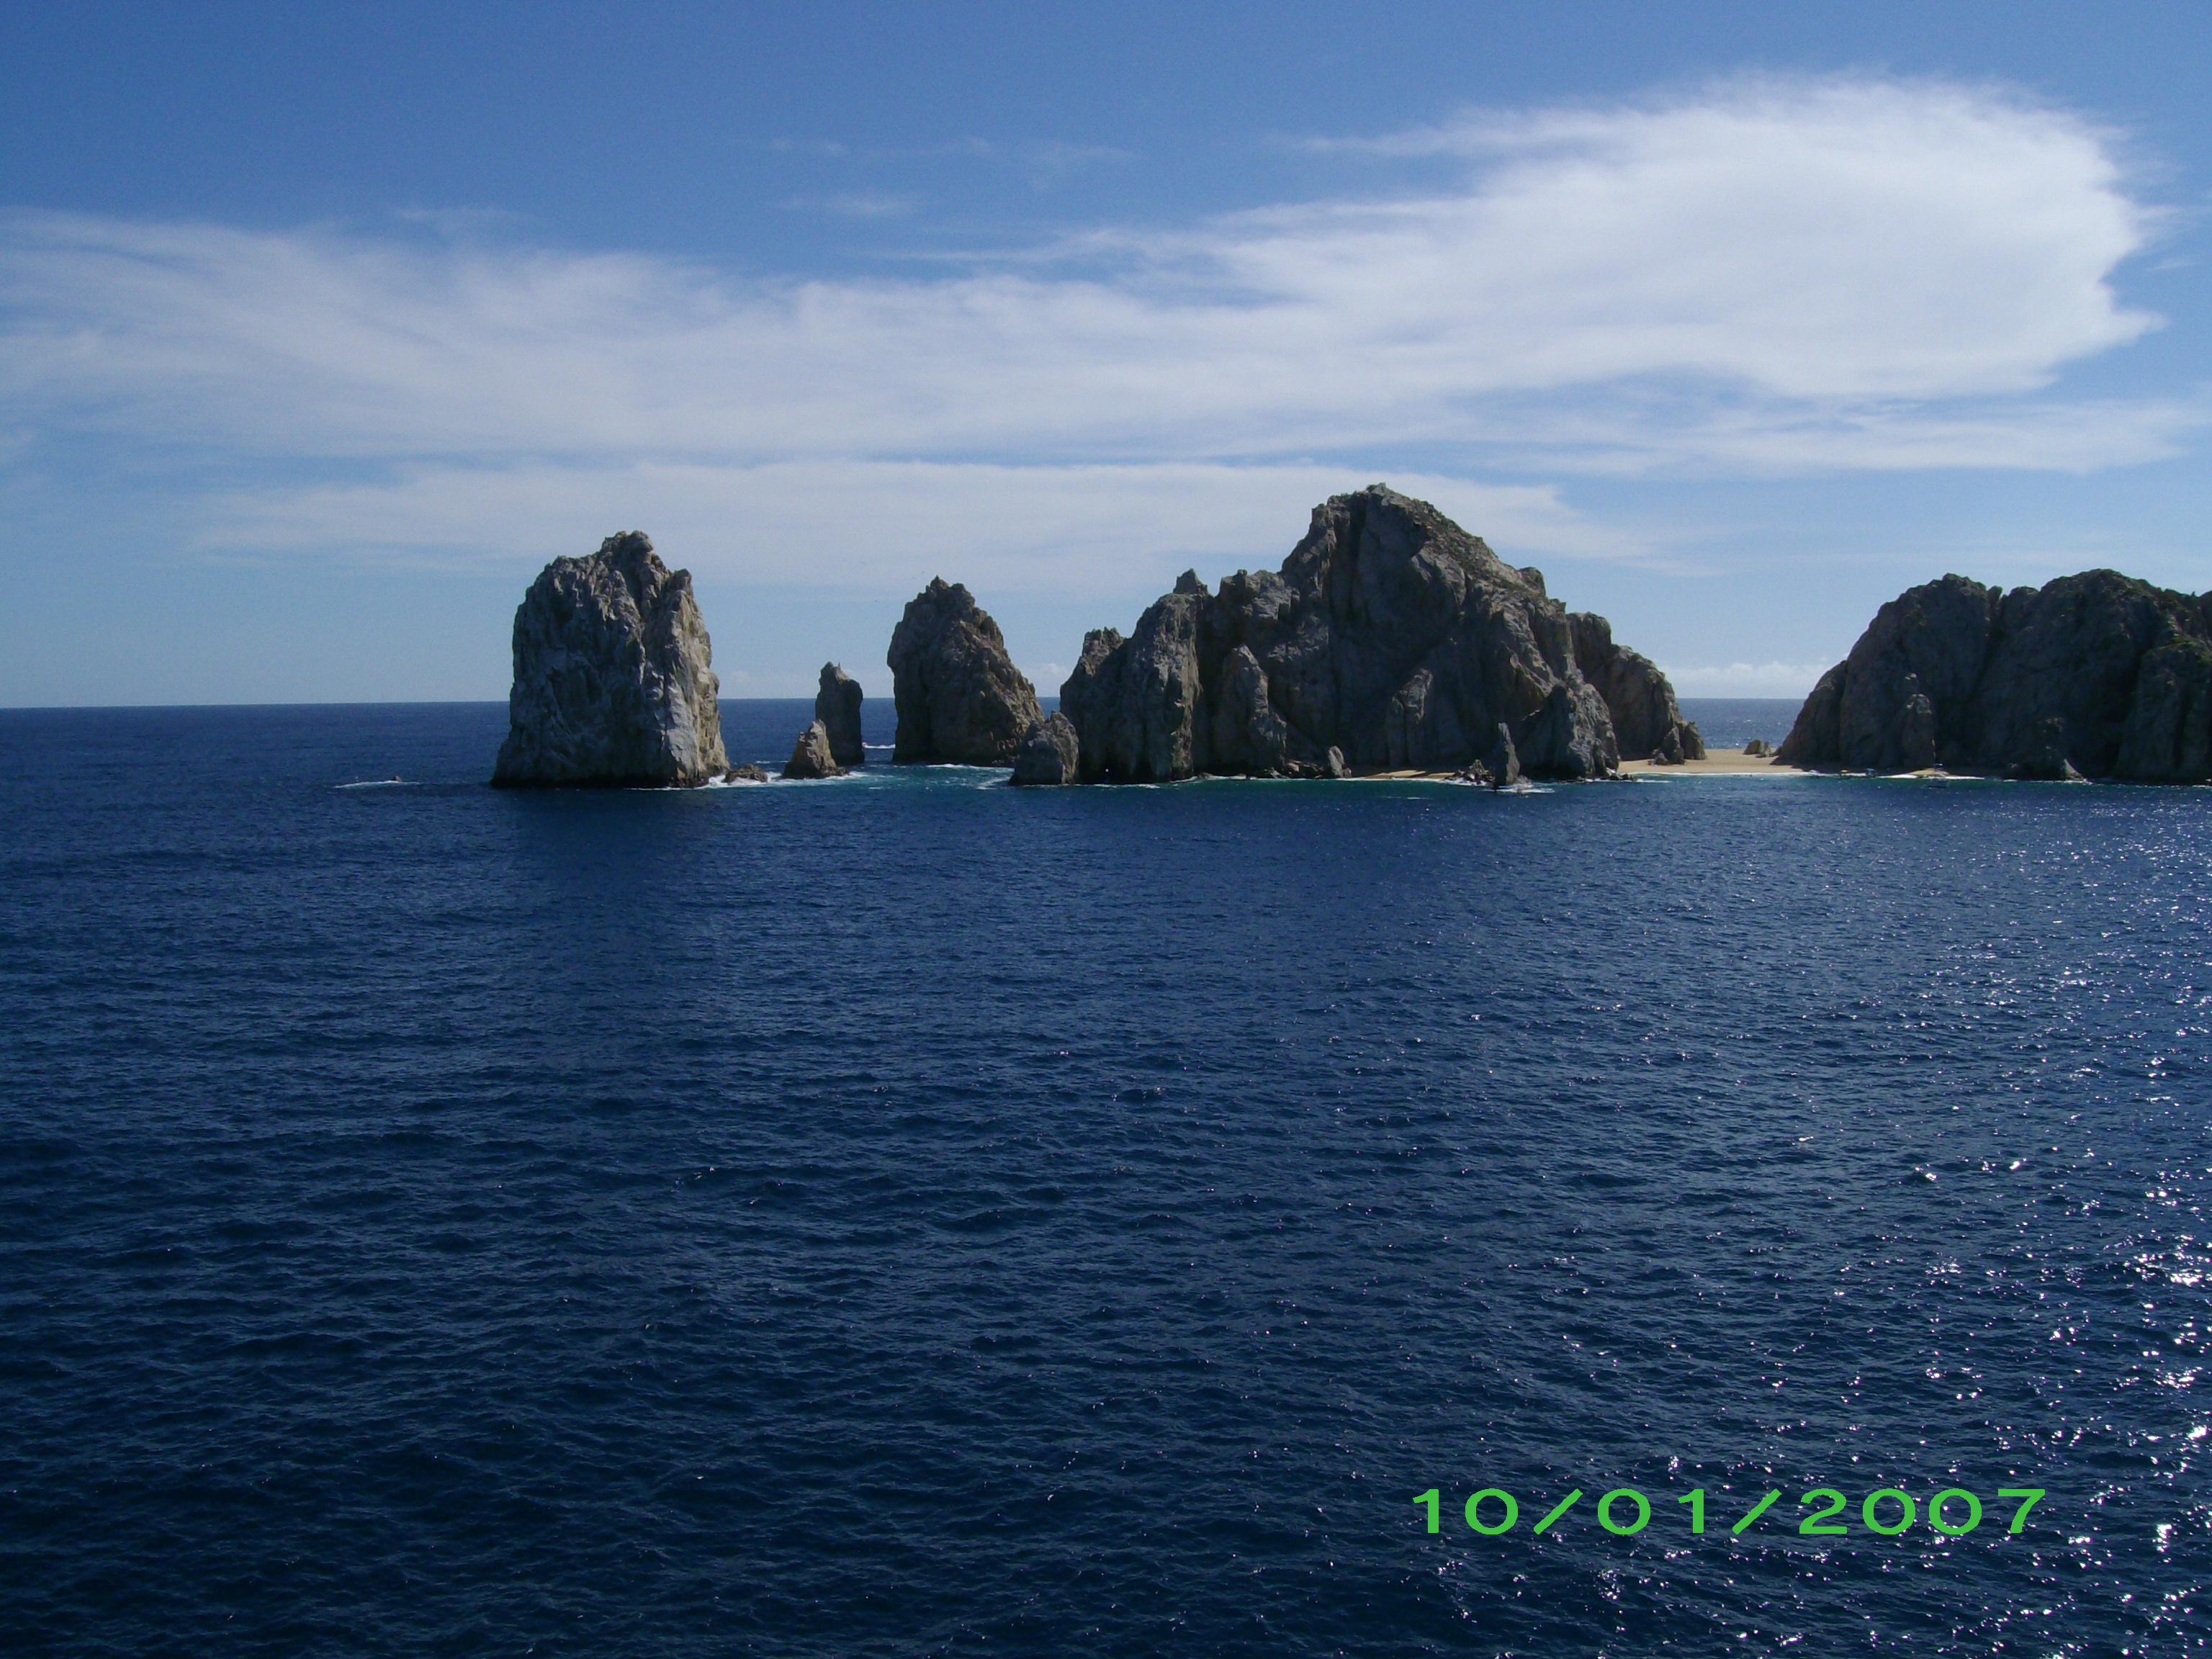 Lovers beach and rock formations